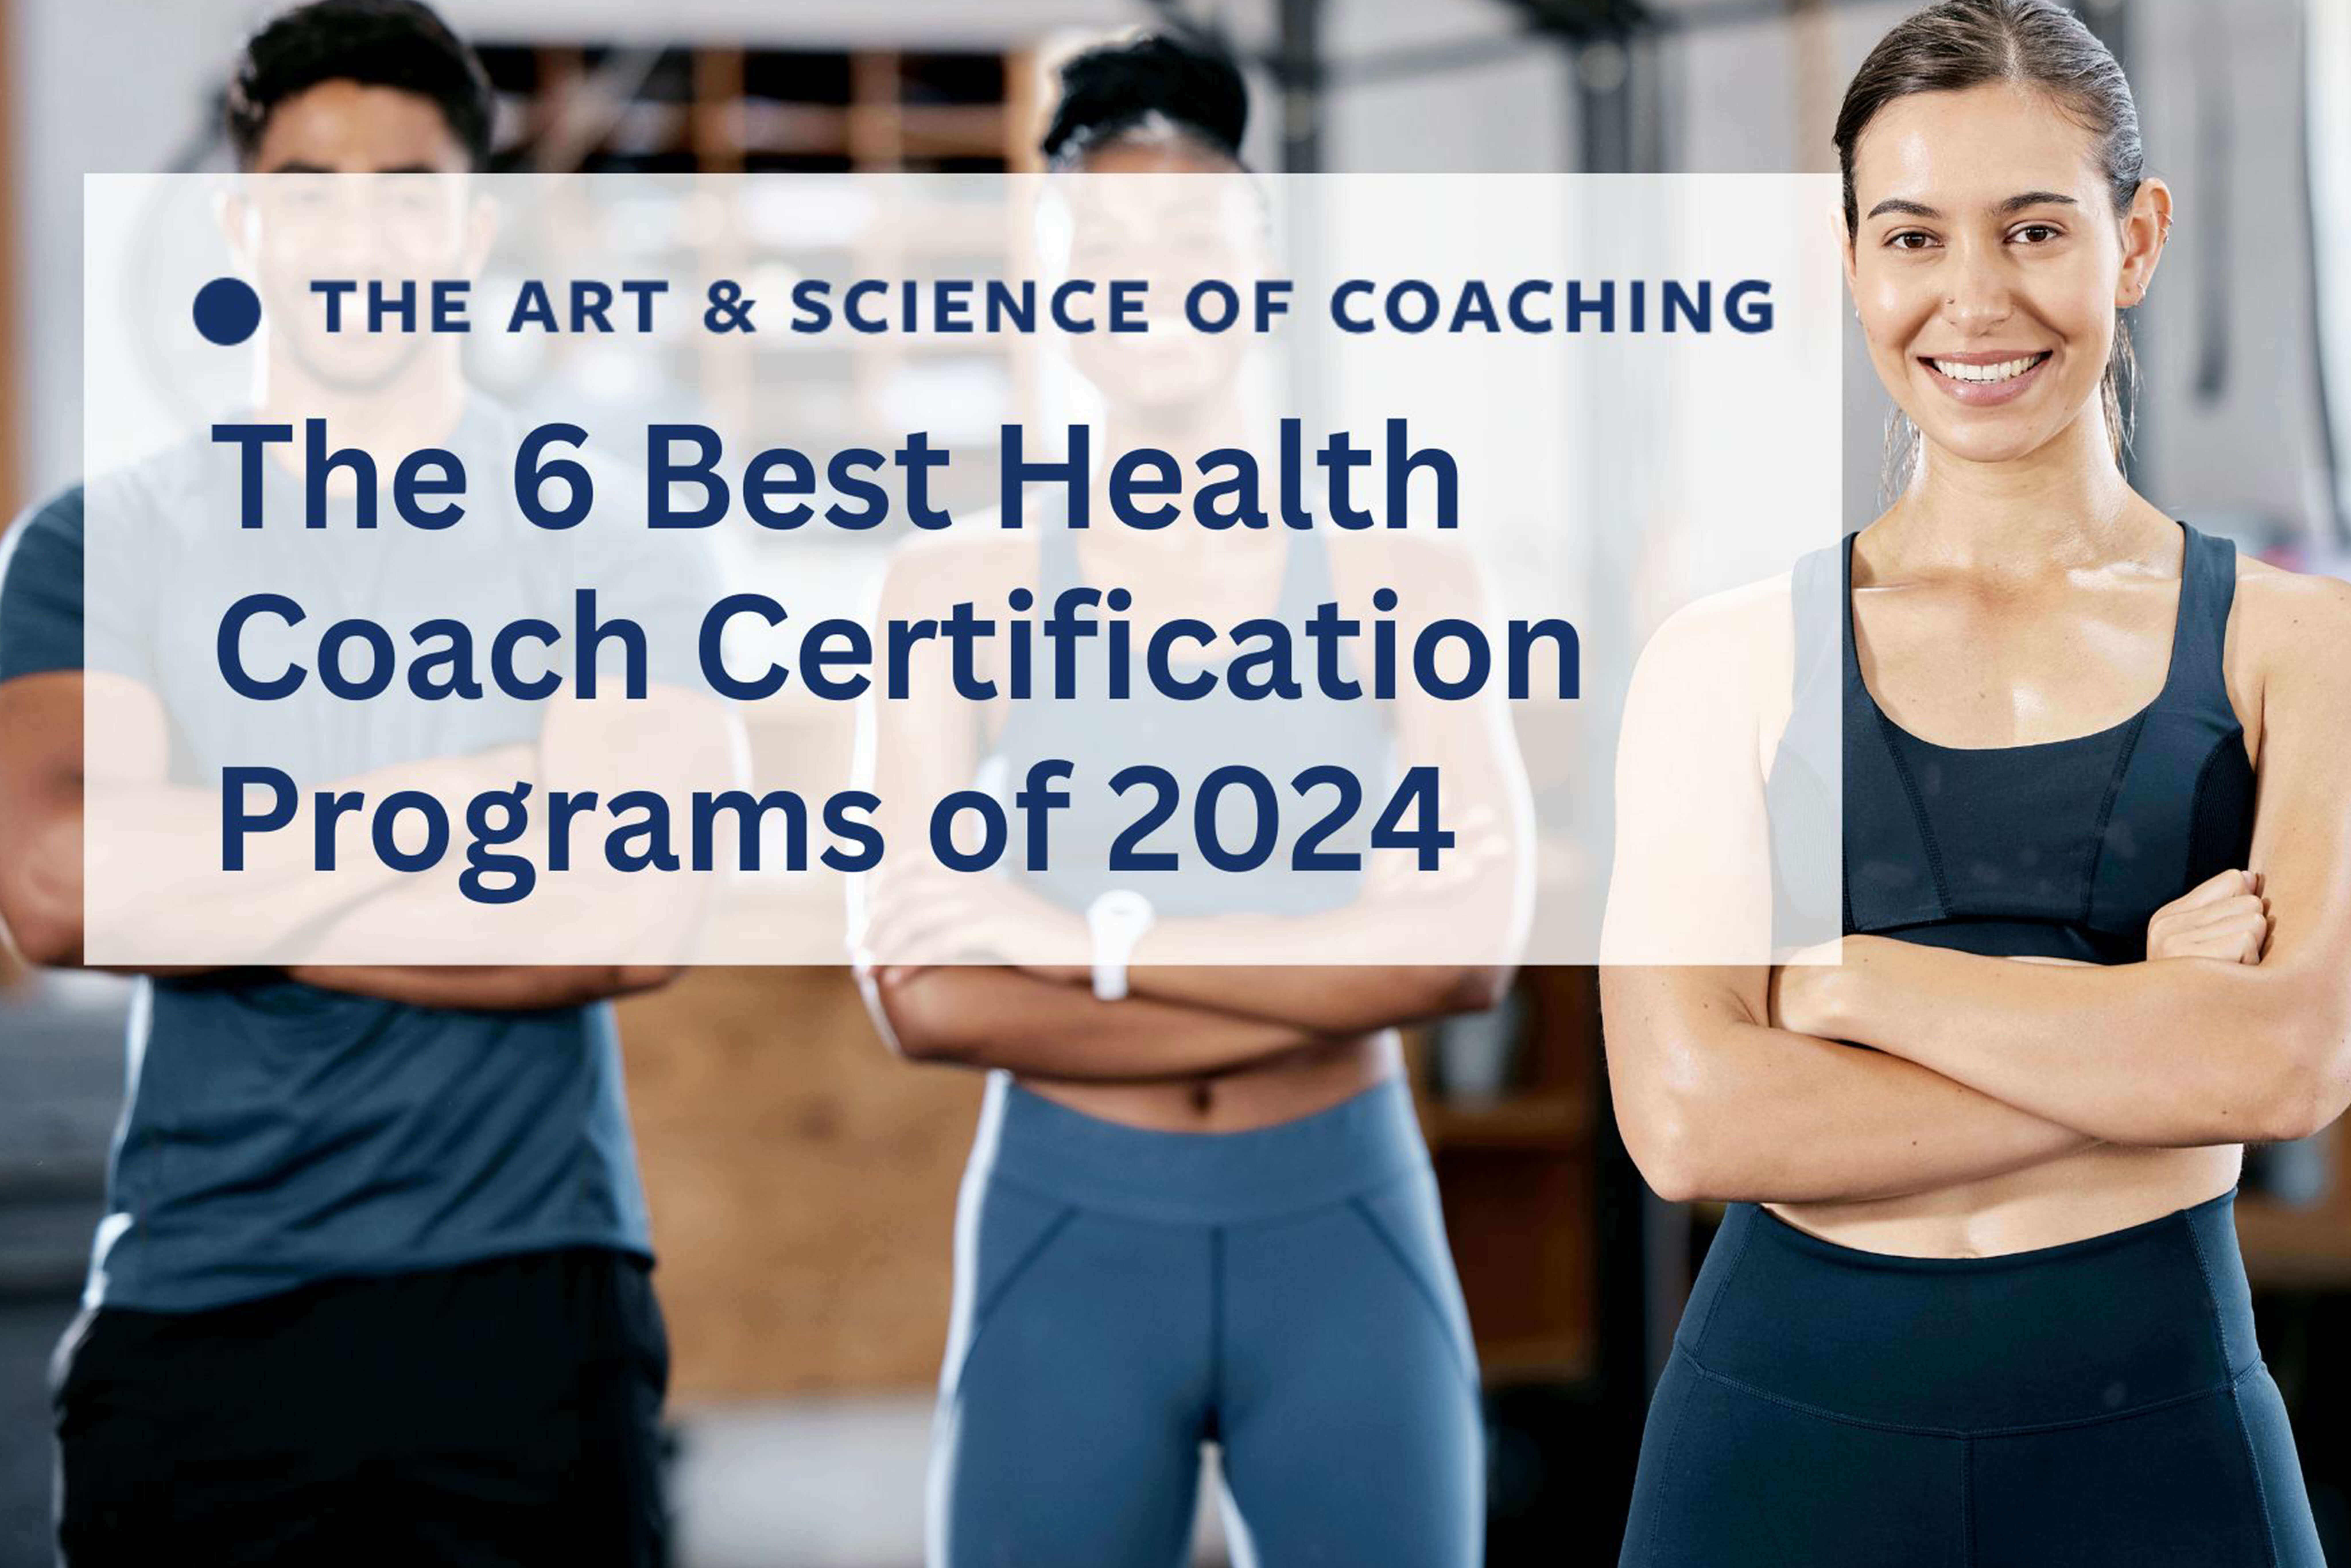 Which of these courses is the best health coach certification for you?